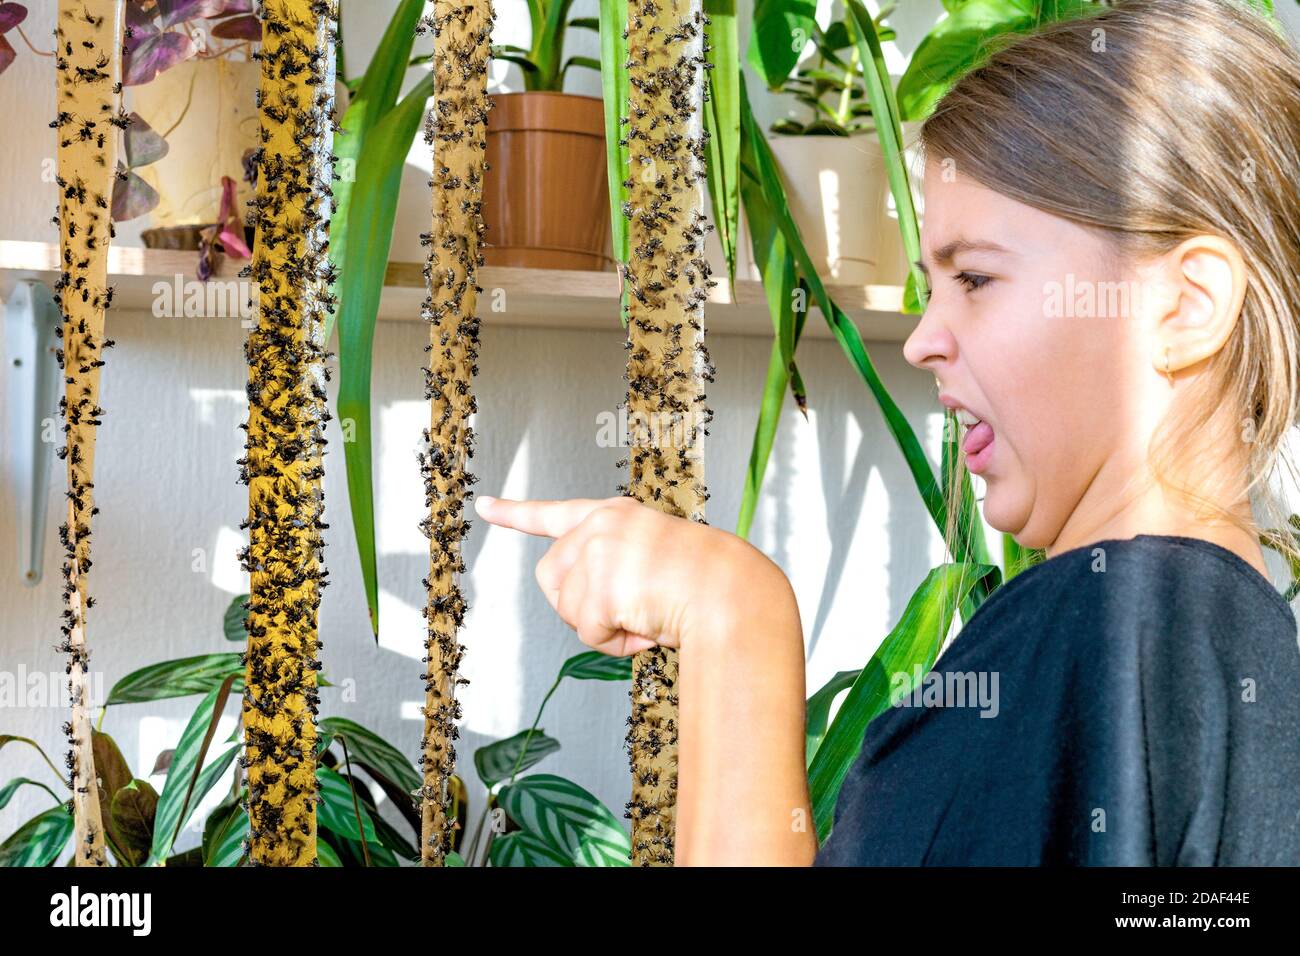 The caucasian girl points a disgusted finger at the flies stuck to the sticky tape. Dead Flies On Sticky Tapes. Flypaper, sticky tape. Trap for flies, insects. Flies stuckTrap for insects insects. Lot of flies stuck to the yellow sticky tapes. Selective focus. Focus on girls face. Stock Photo